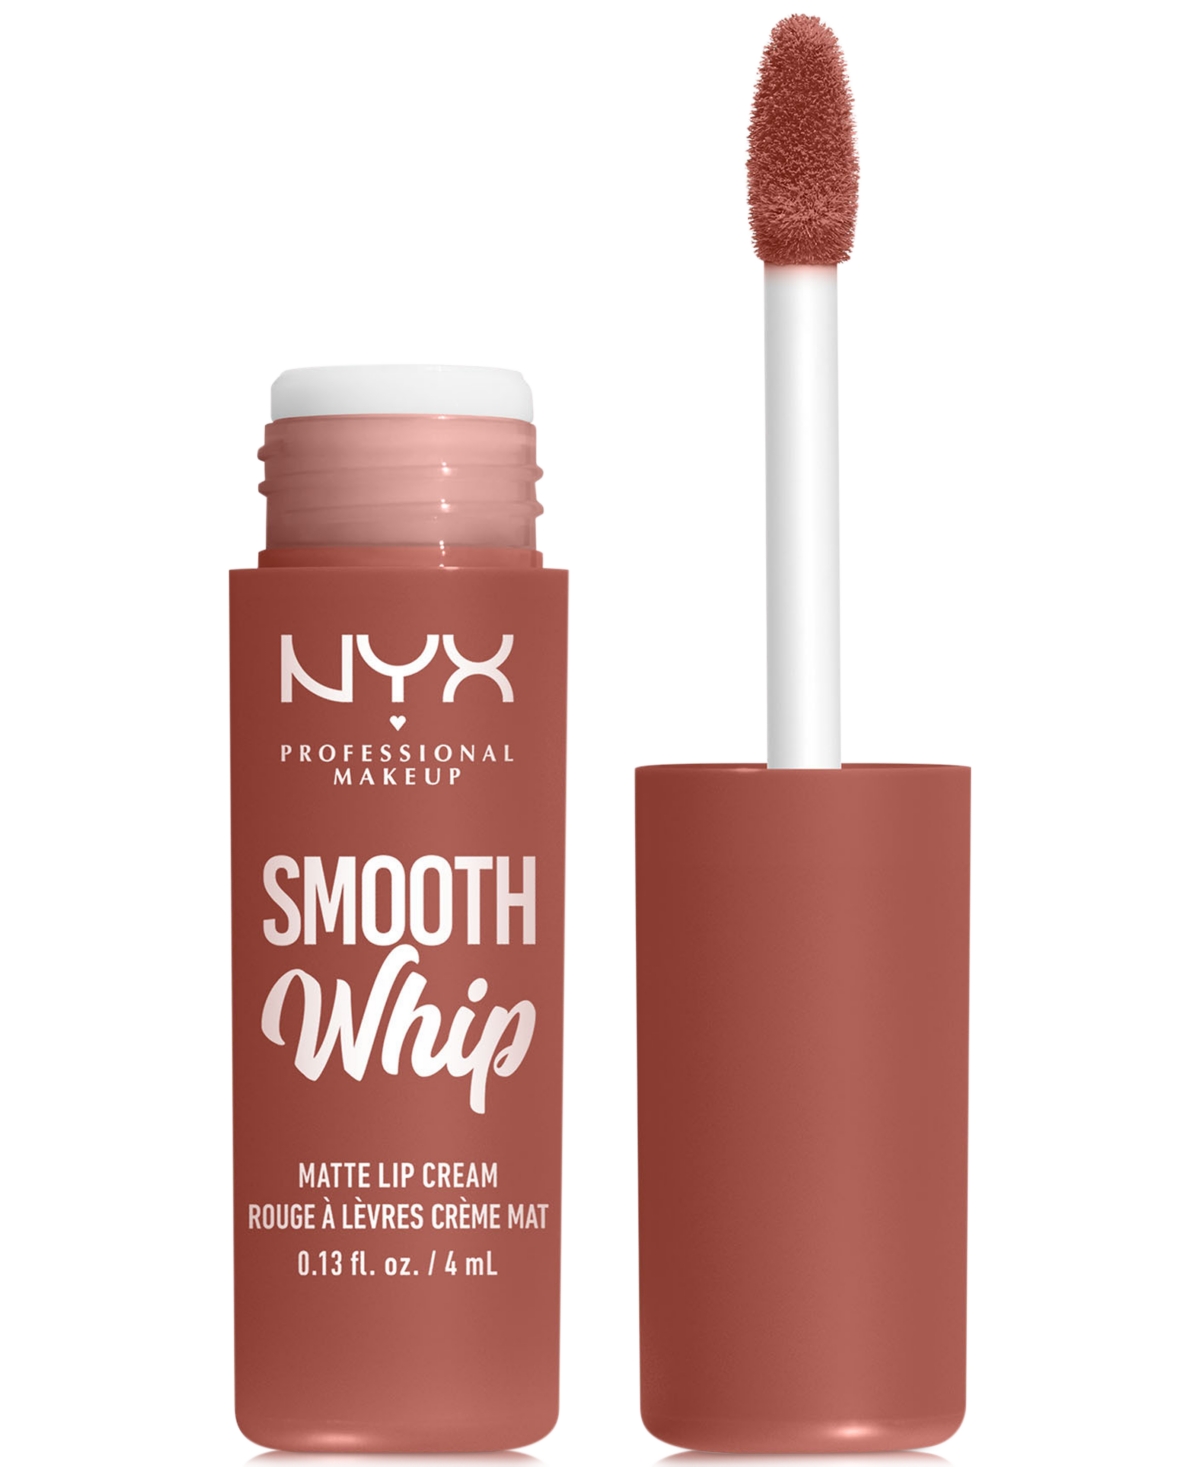 Nyx Professional Makeup Smooth Whip Matte Lip Cream In Teddy Fluff